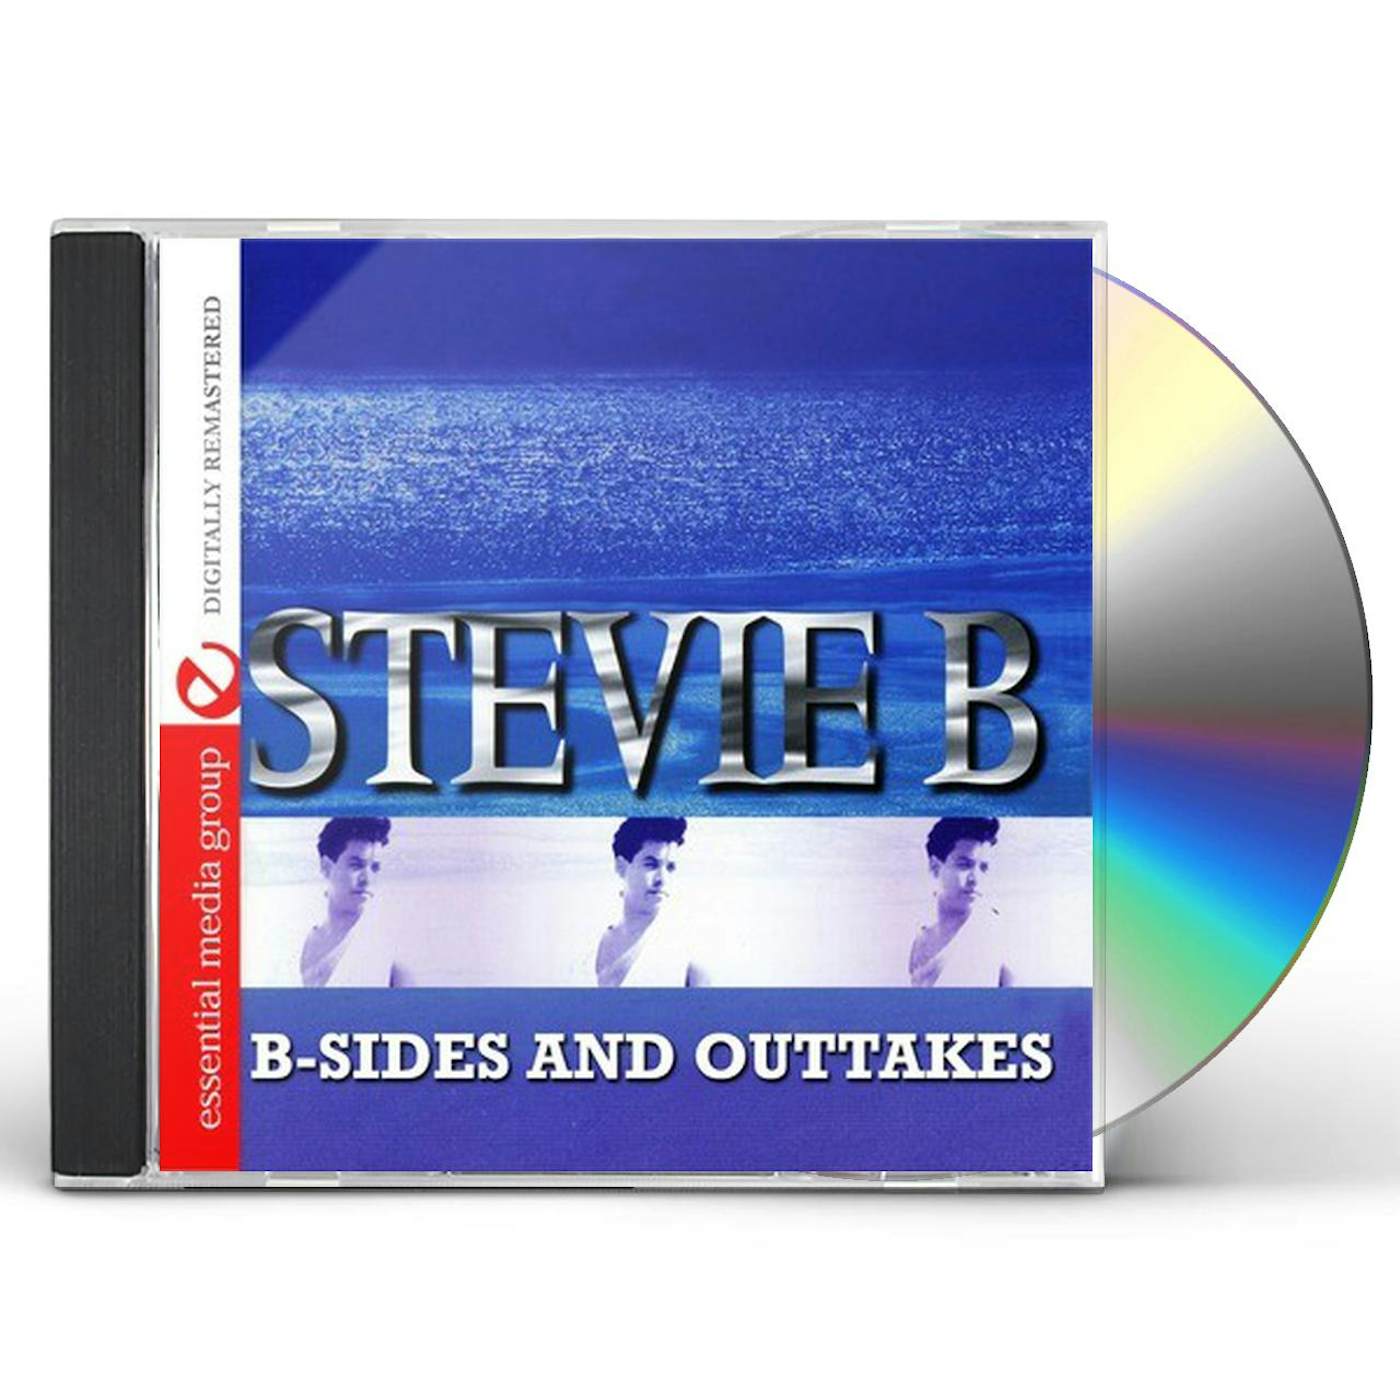 Stevie B B-SIDES AND OUTTAKES CD